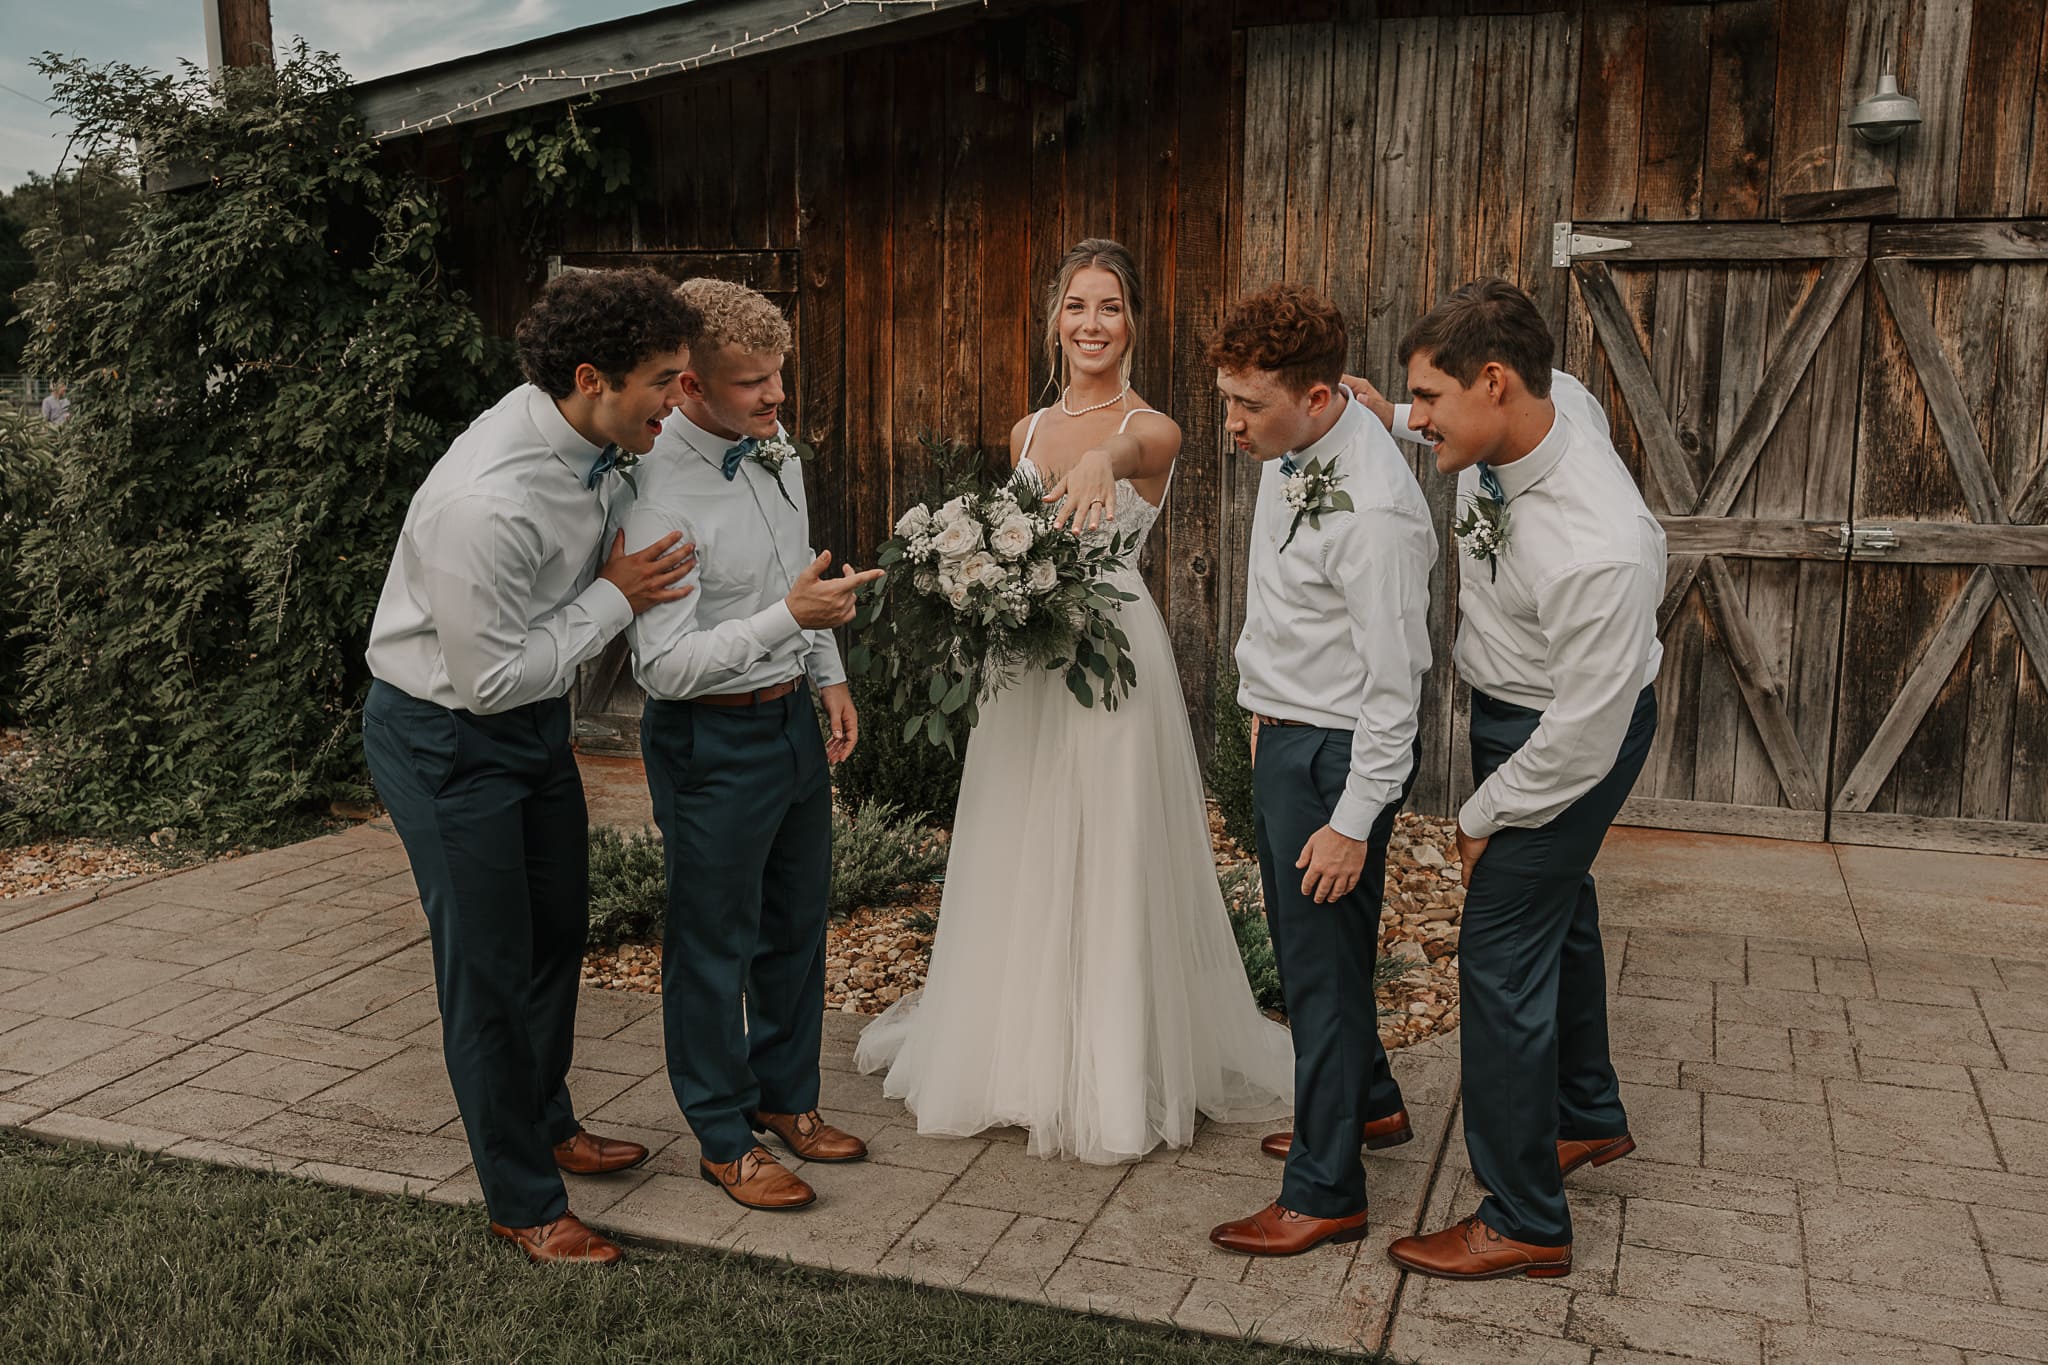 Bride shows her wedding ring off to the groomsmen